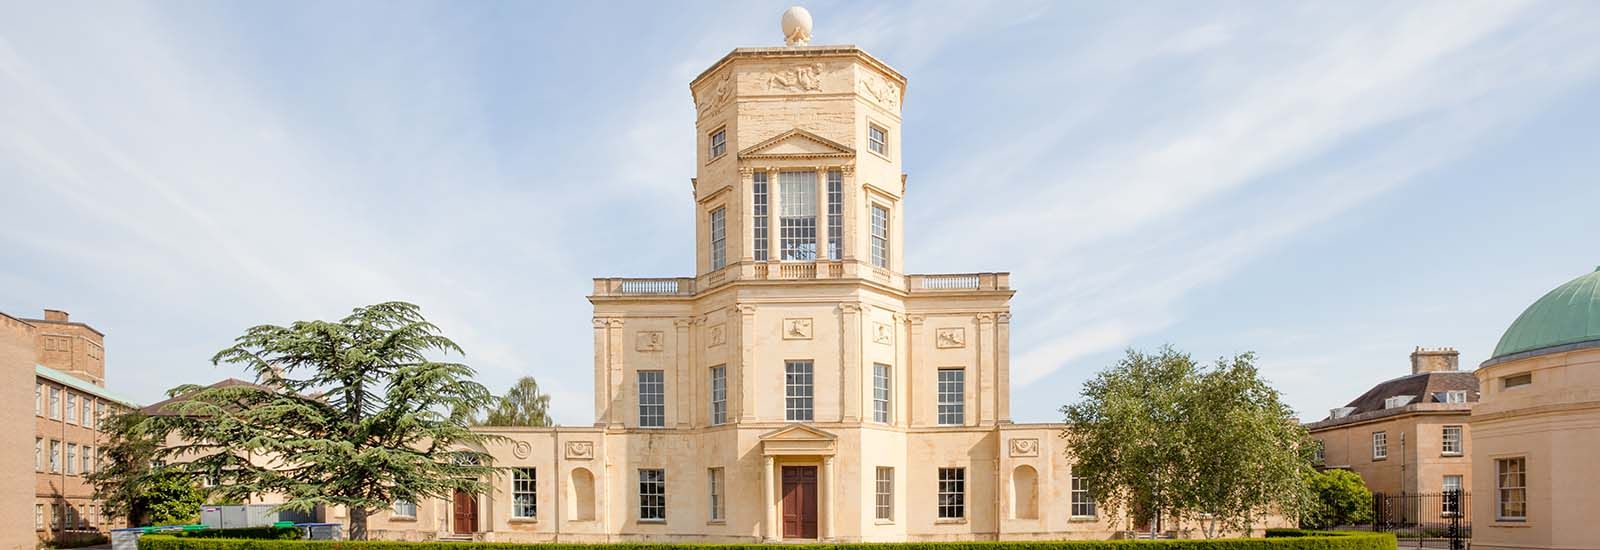 Photograph of the Radcliffe Observatory